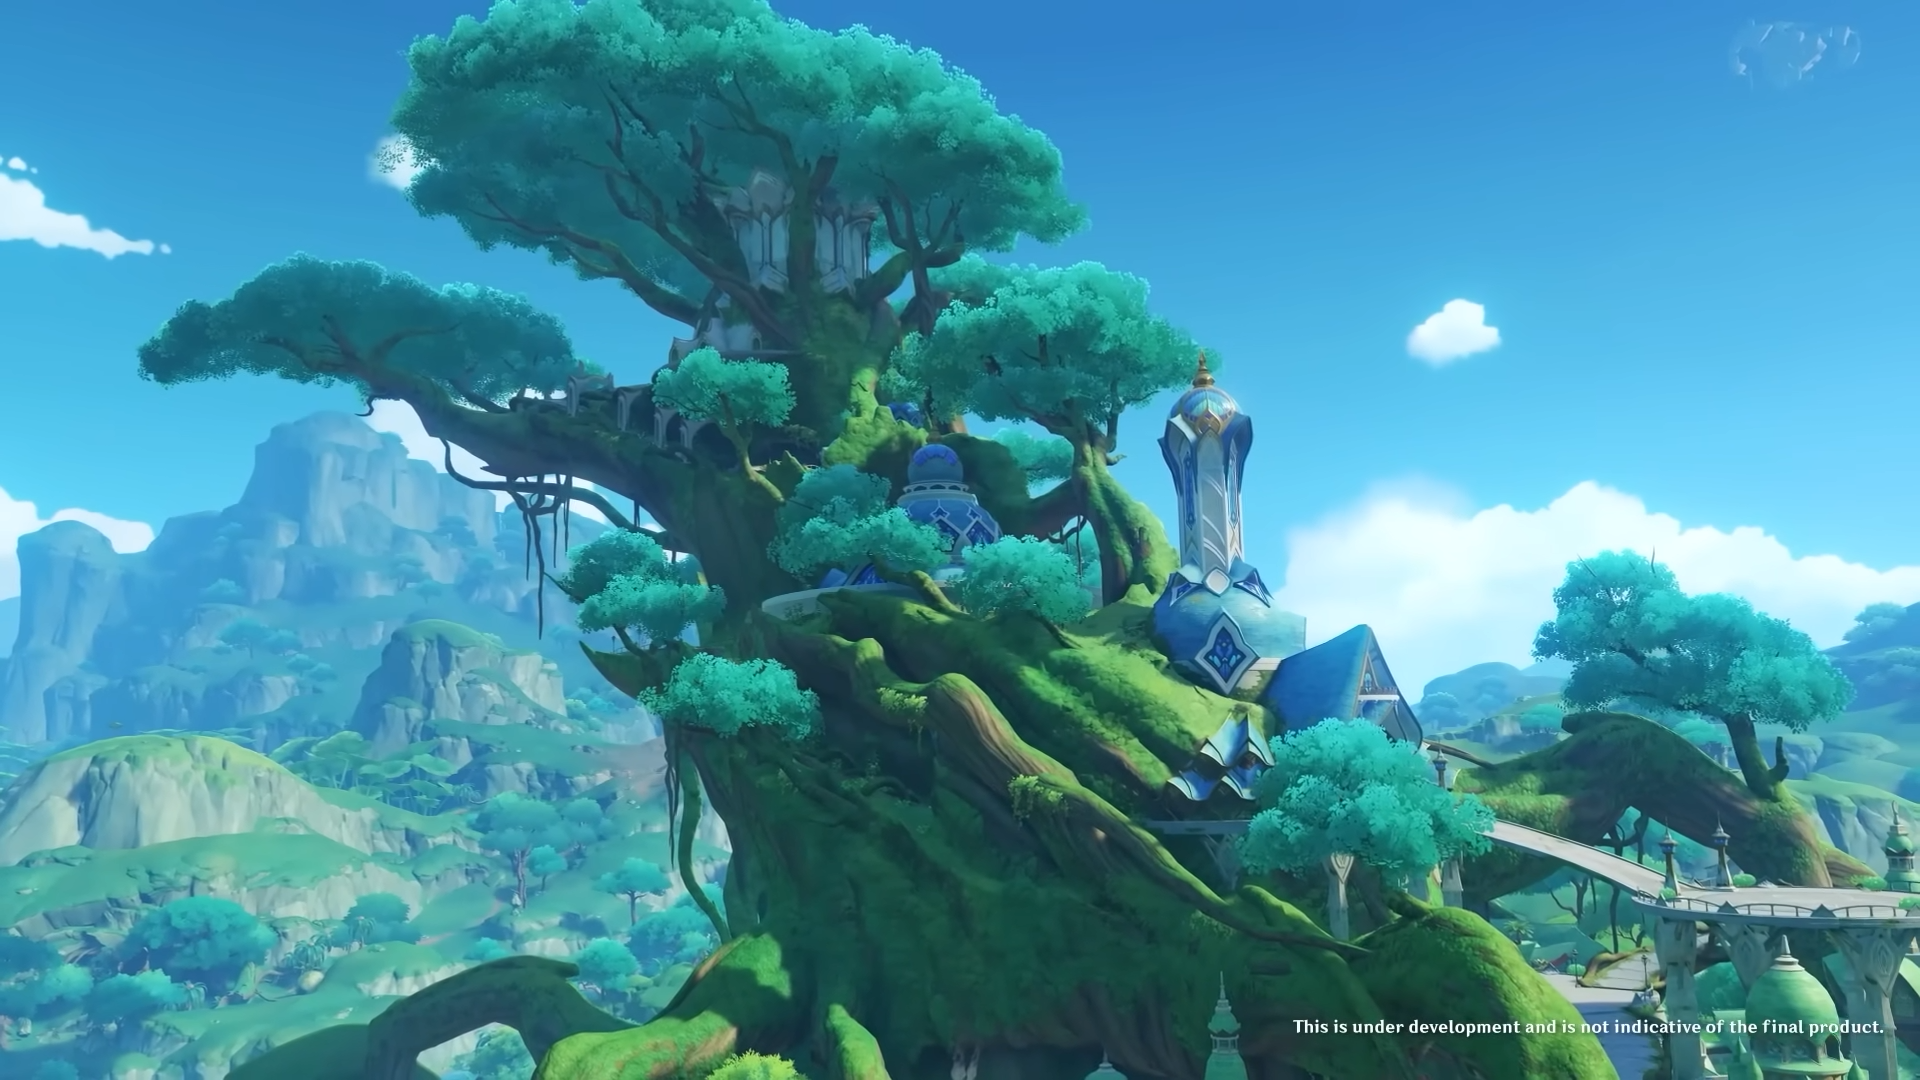 A teaser trailer scene showing Sumeru in Genshin Impact: a fantastical structure built into a giant tree.